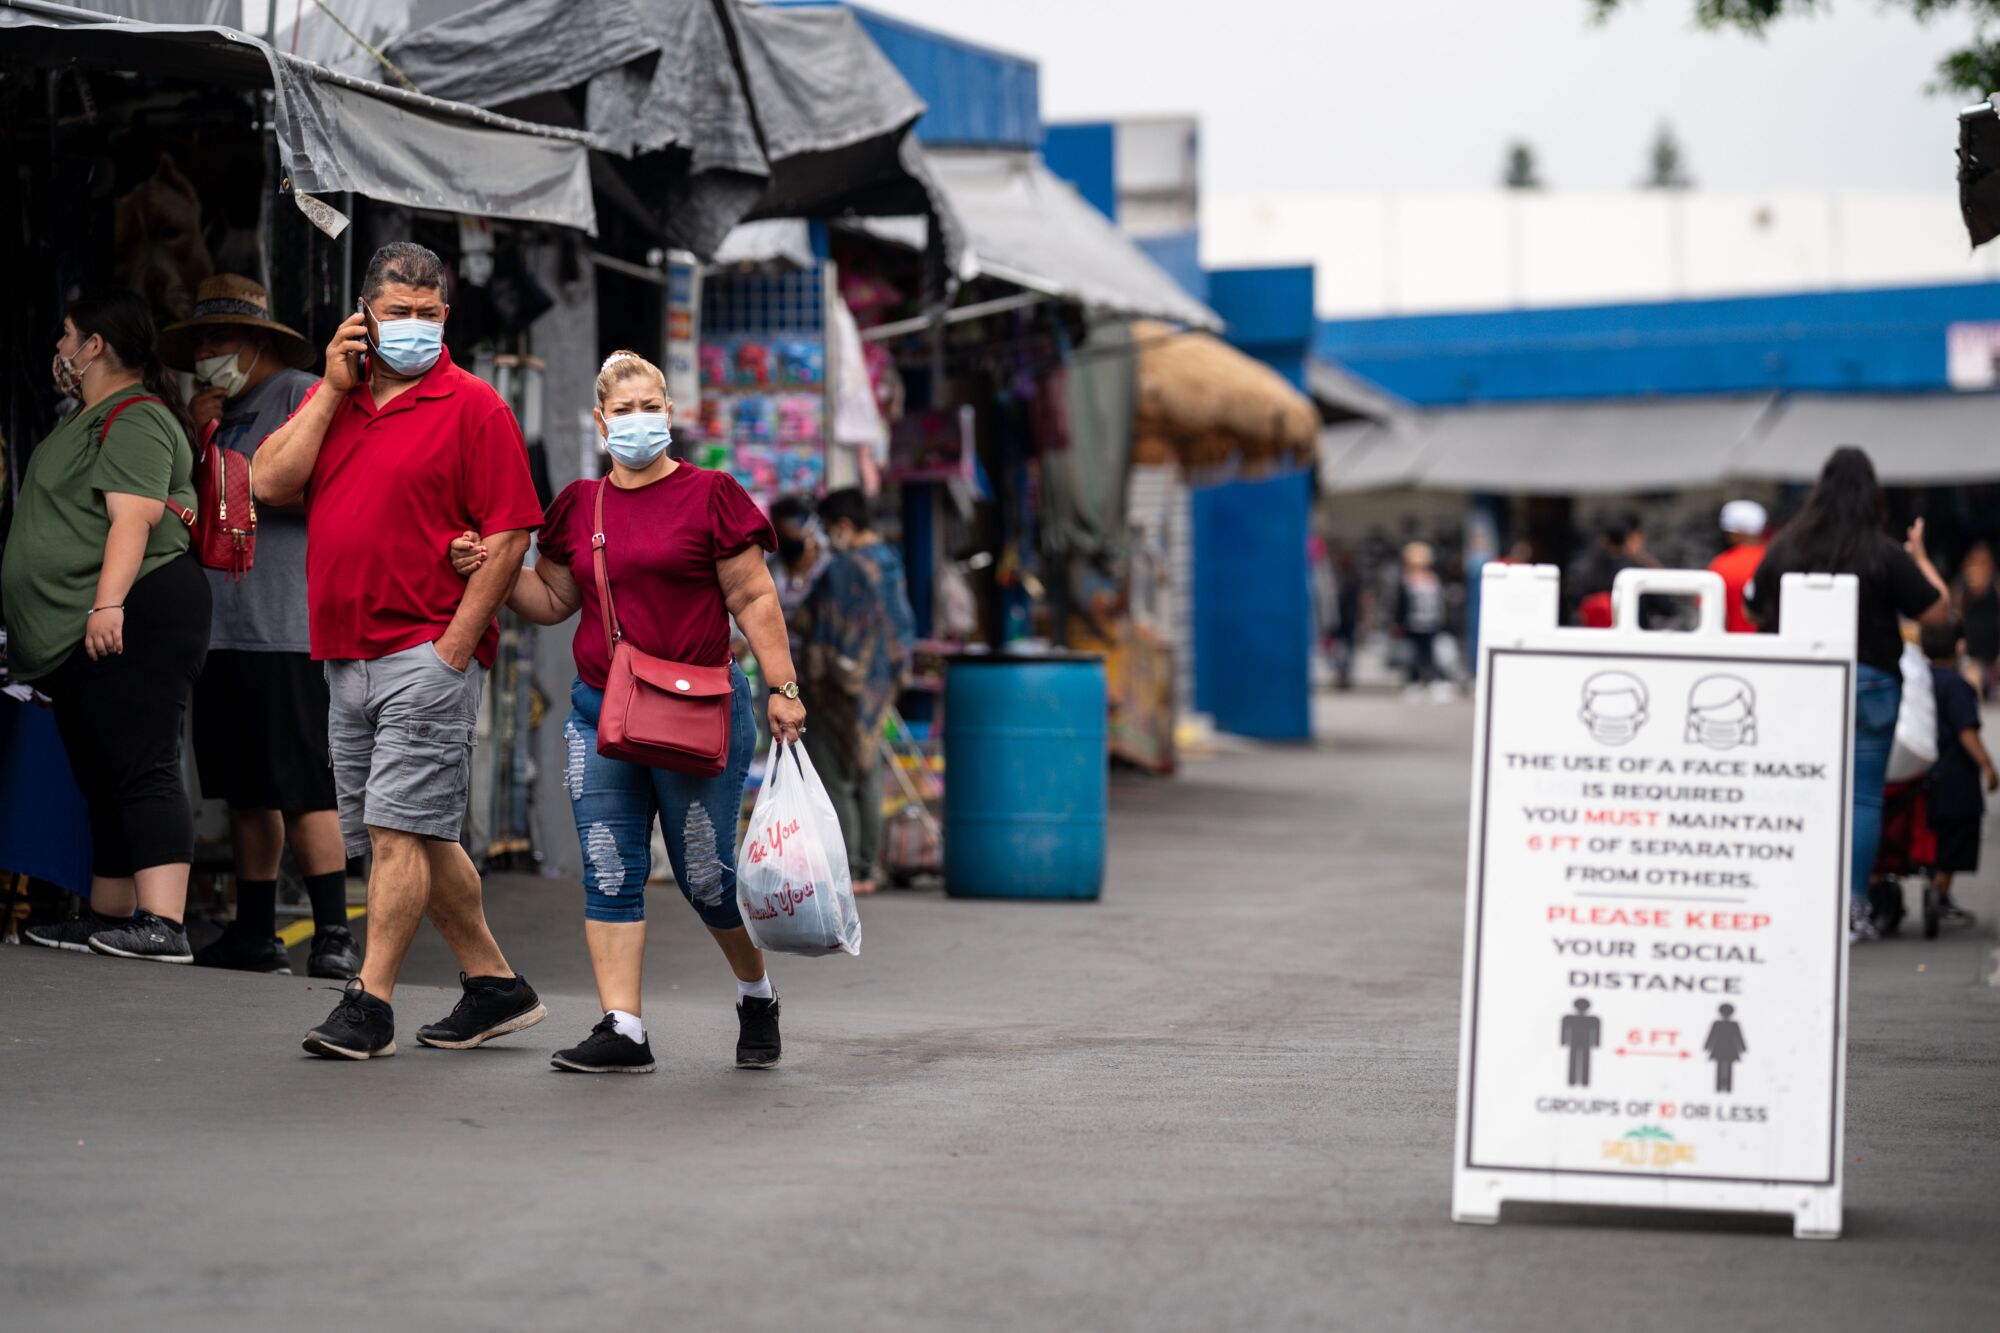 People going to the Santa Fe Springs Swap Meet are required to wear masks and maintain proper social distancing